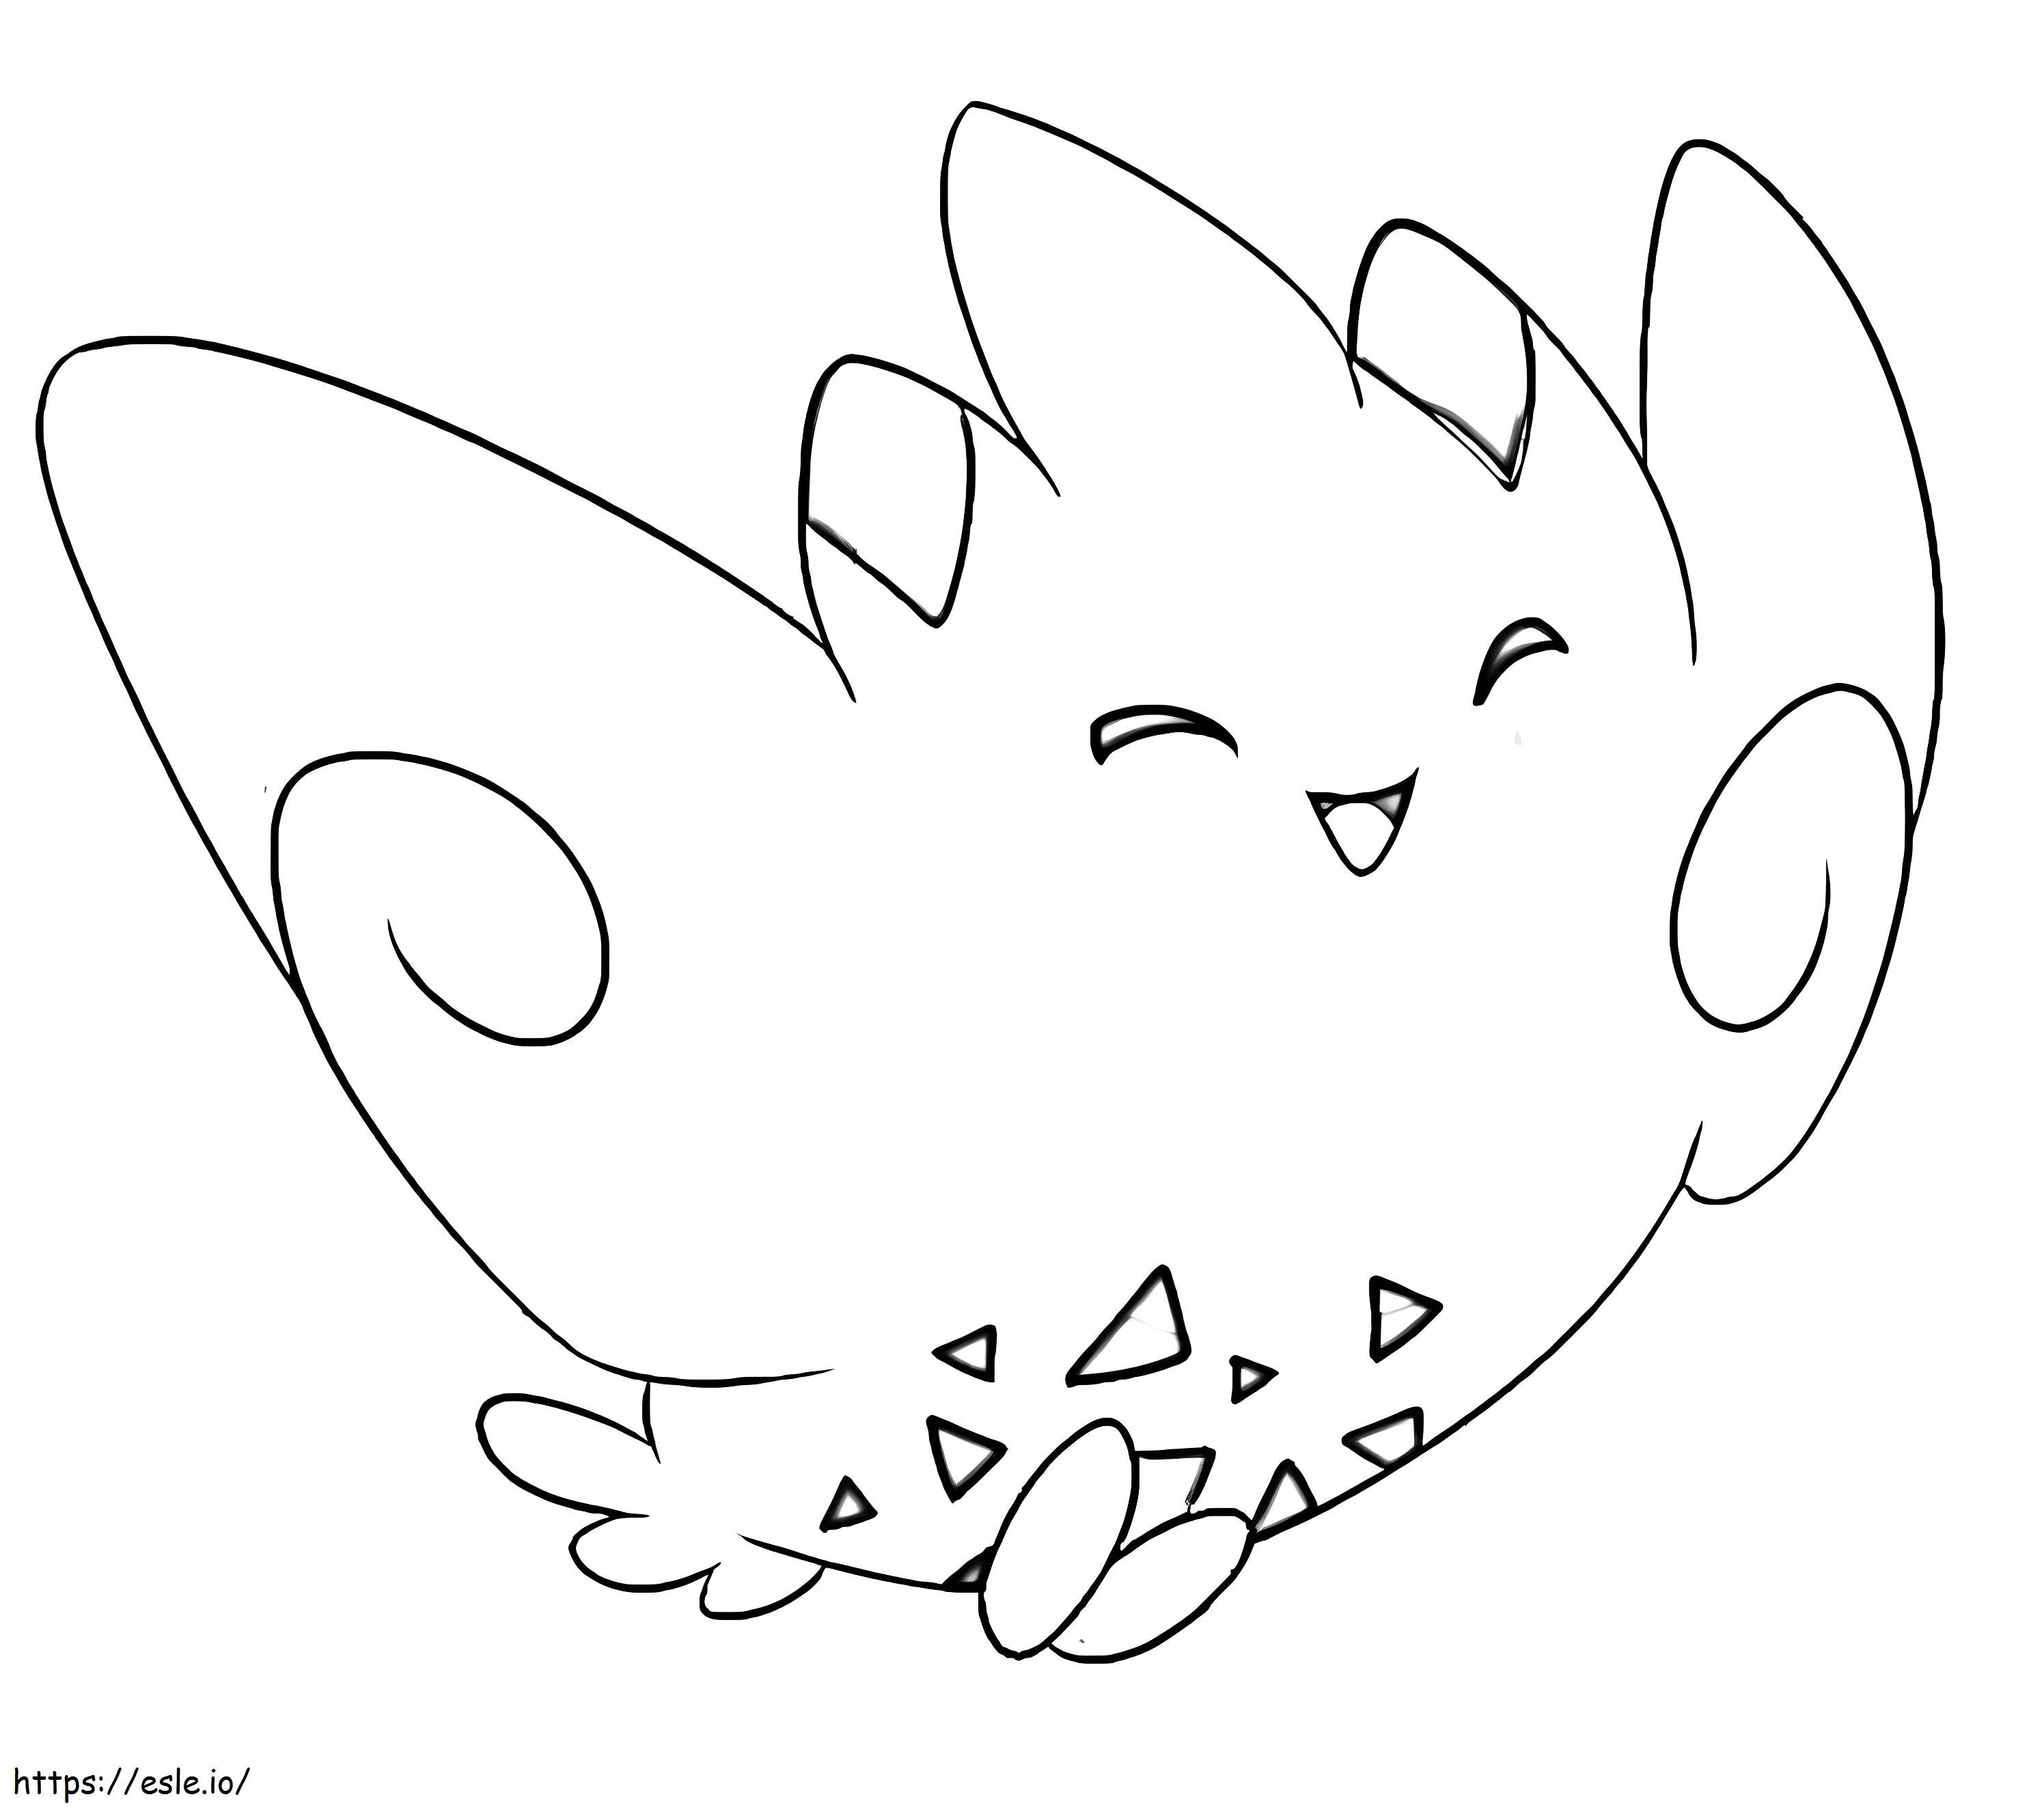 Togekiss Pokemon 1 coloring page